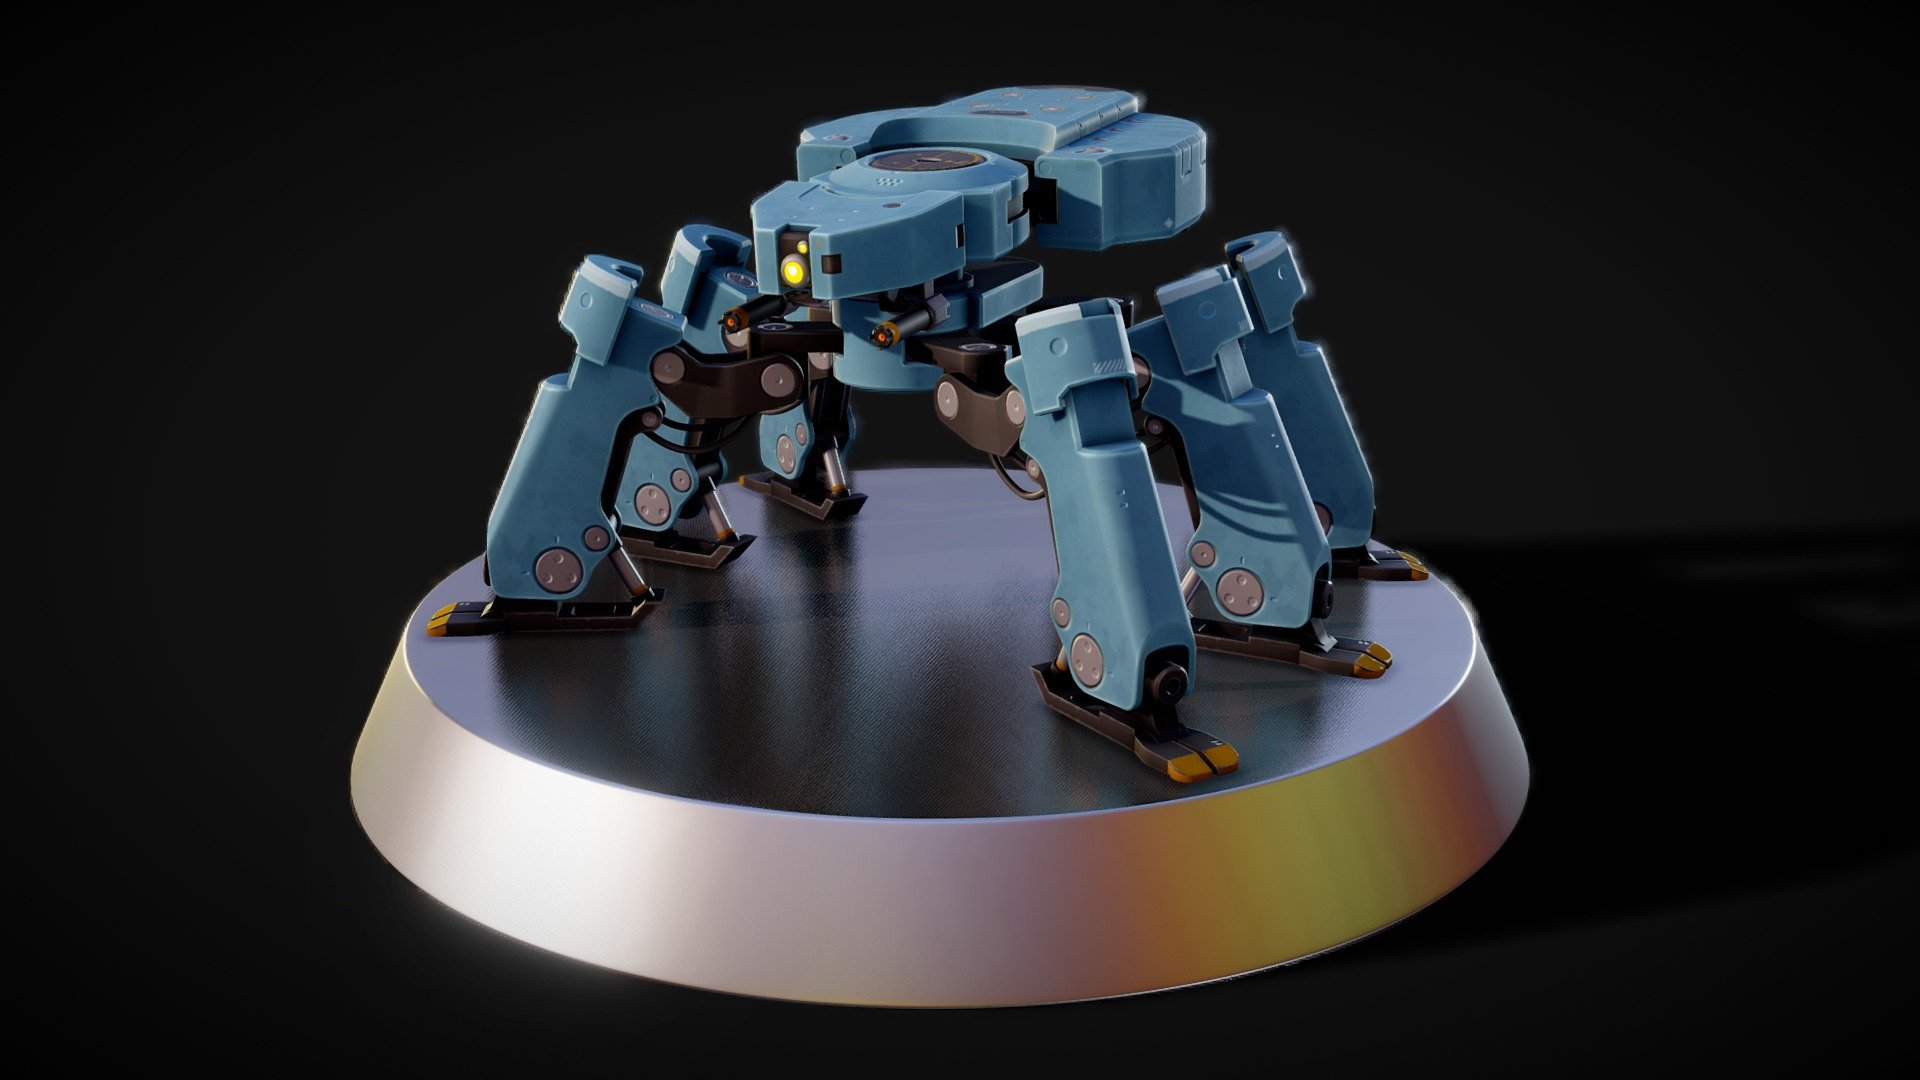 Found an amazing concept on art by https://www.artstation.com/rymin.

I just had to model this thing, I LOVE its design and appeal as an avid strategy game player 3d model